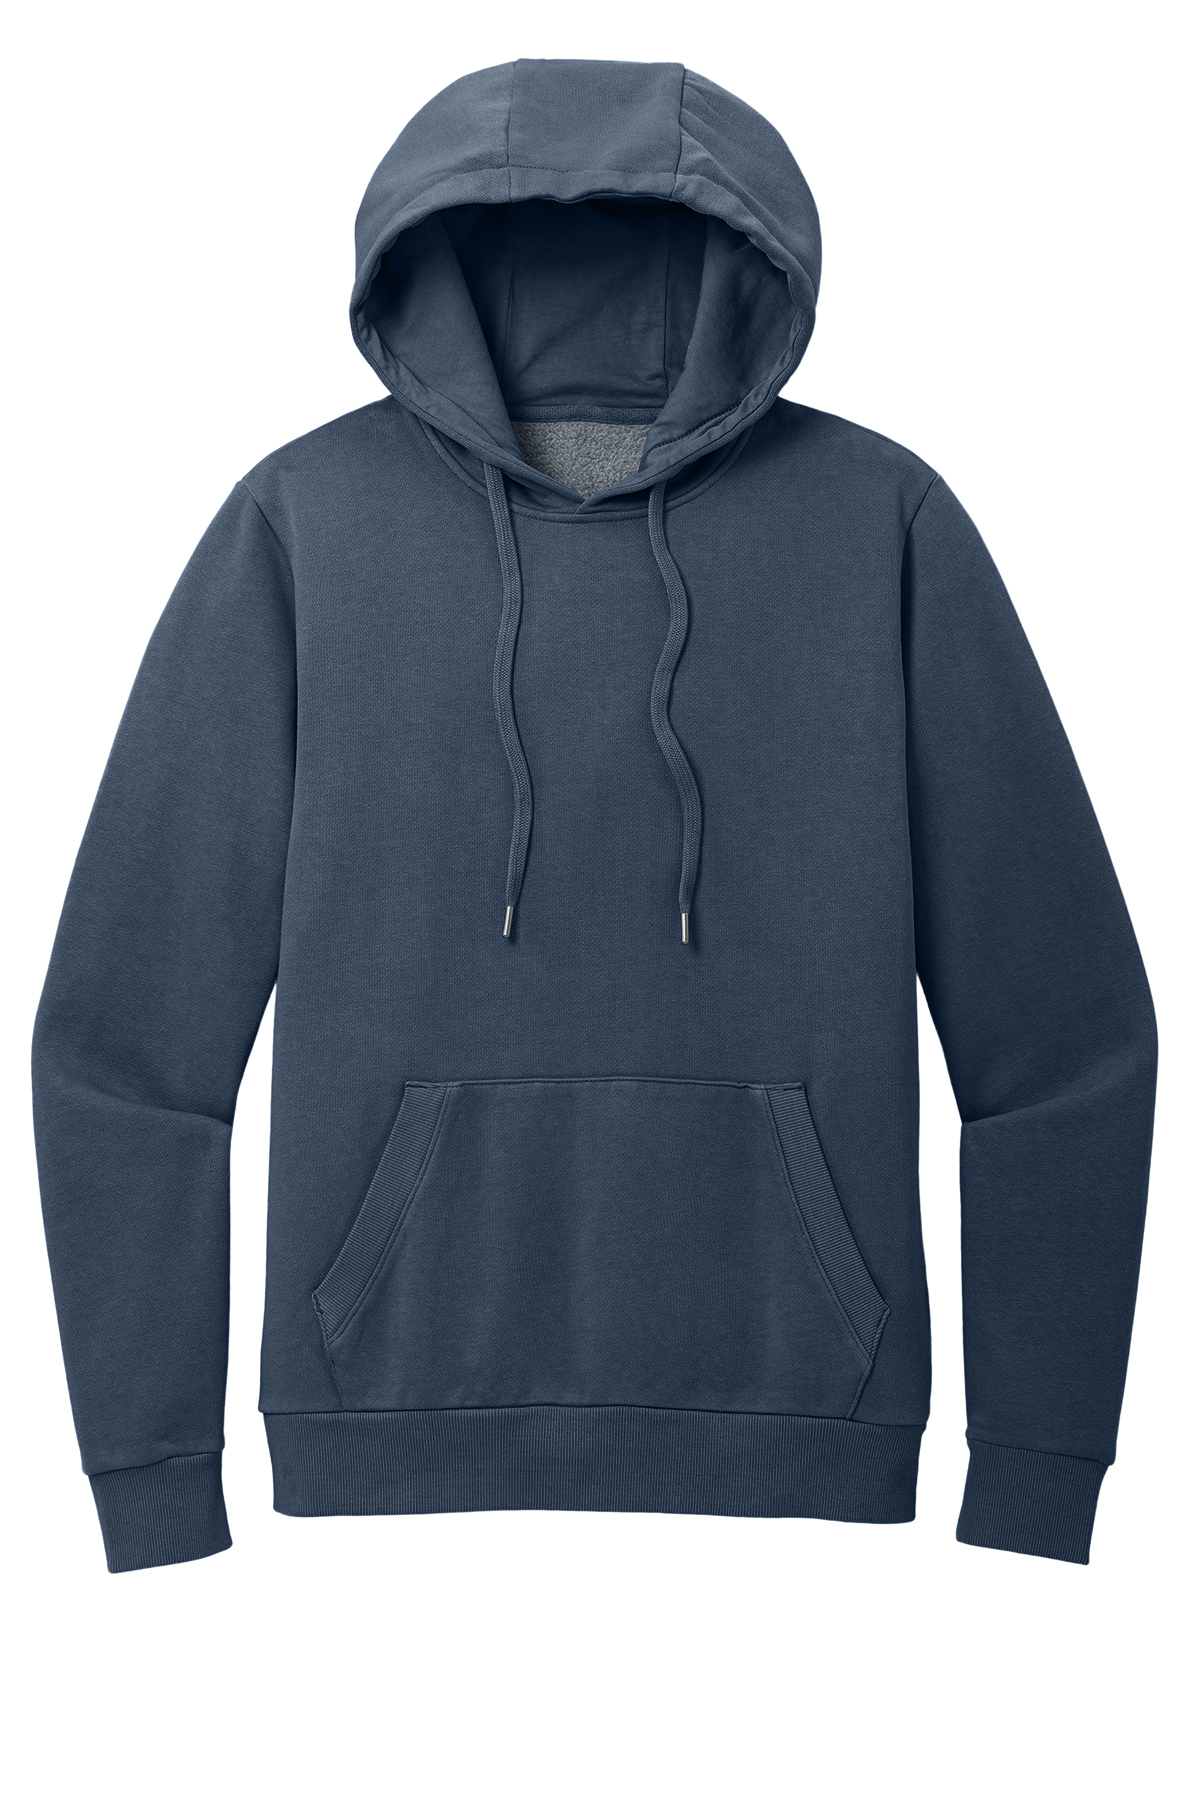 District Wash Fleece Hoodie | Product | Company Casuals